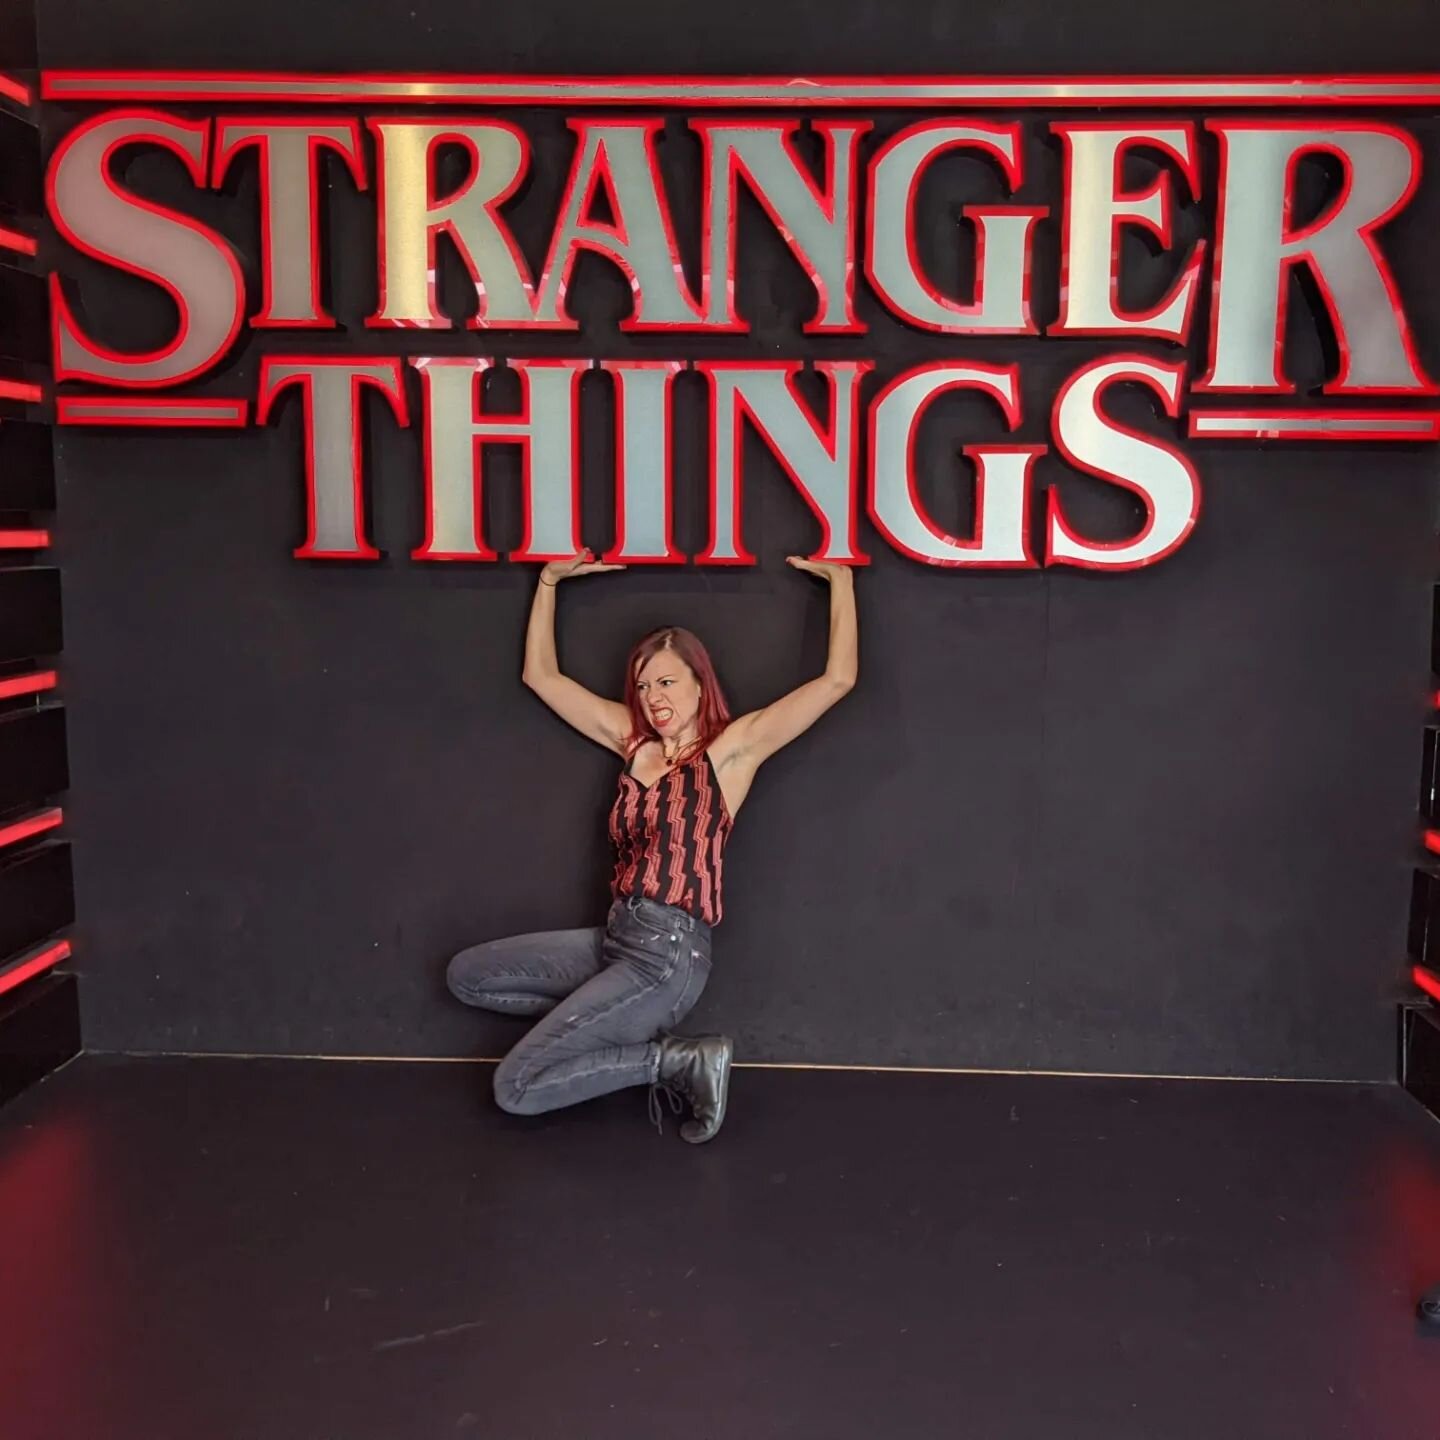 I had the chance to visit the @stranger.things.store in Chicago (Oak Brook) before it closed. Click through to see this #80sbaby ham it up in Hawkins 😃 

#strangerthingsfan #strangerthingsstore #strangerthingsnetflix #hawkinsindiana #hawkinslab #duf